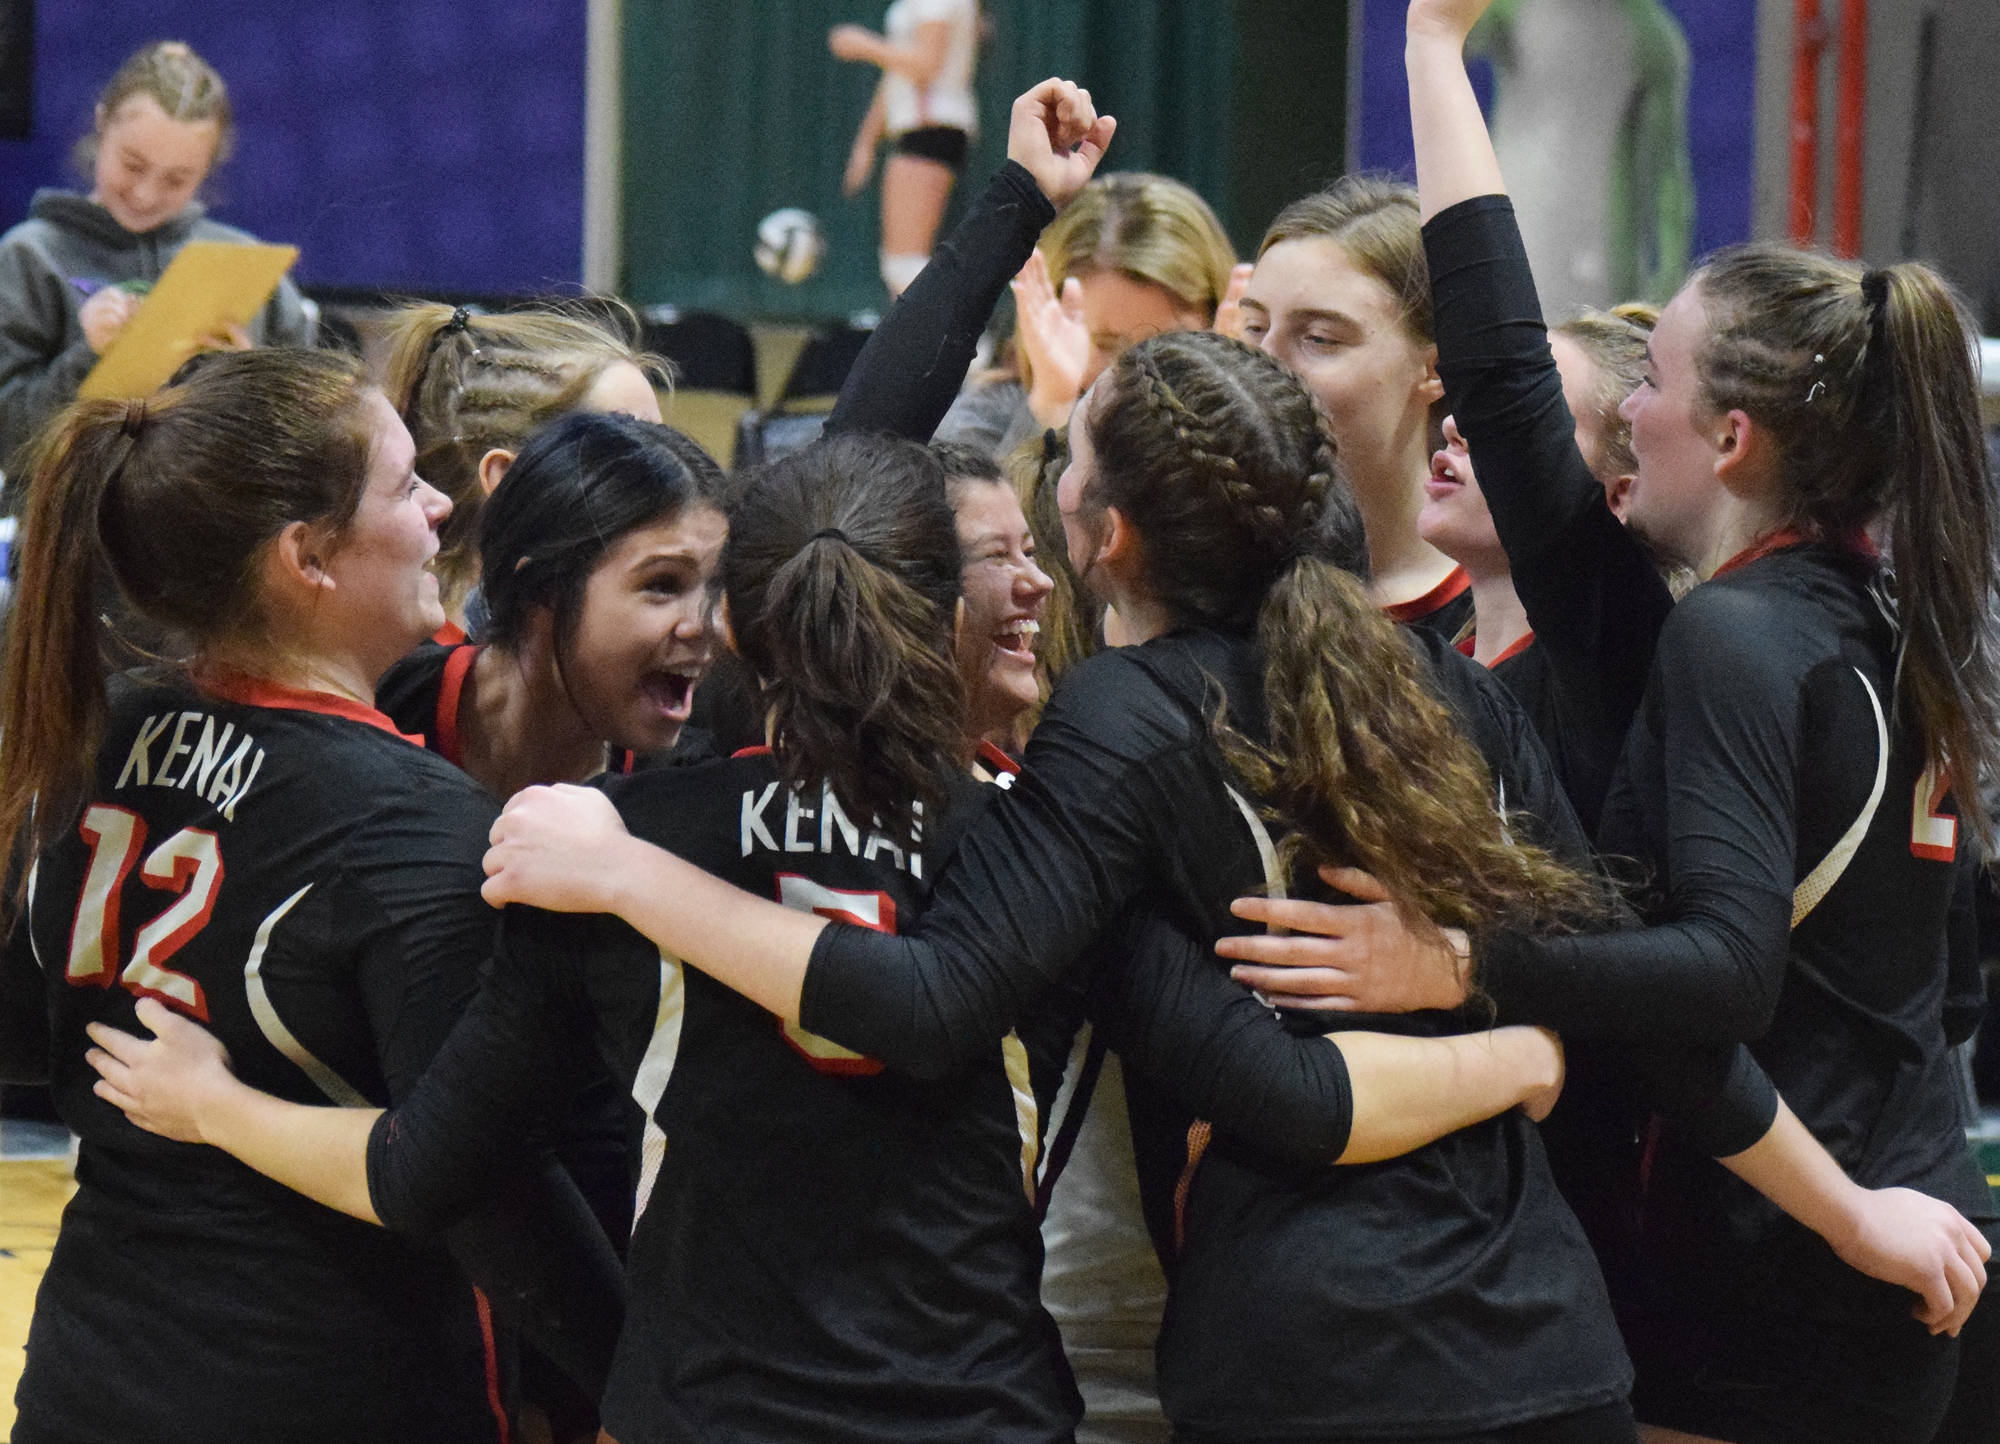 Kenai Central players celebrate after defeating Nikiski in a state semifinal Friday, Nov. 15, 2019, at the Class 3A state volleyball tournament at the Alaska Airlines Center in Anchorage, Alaska. (Photo by Joey Klecka/Peninsula Clarion)